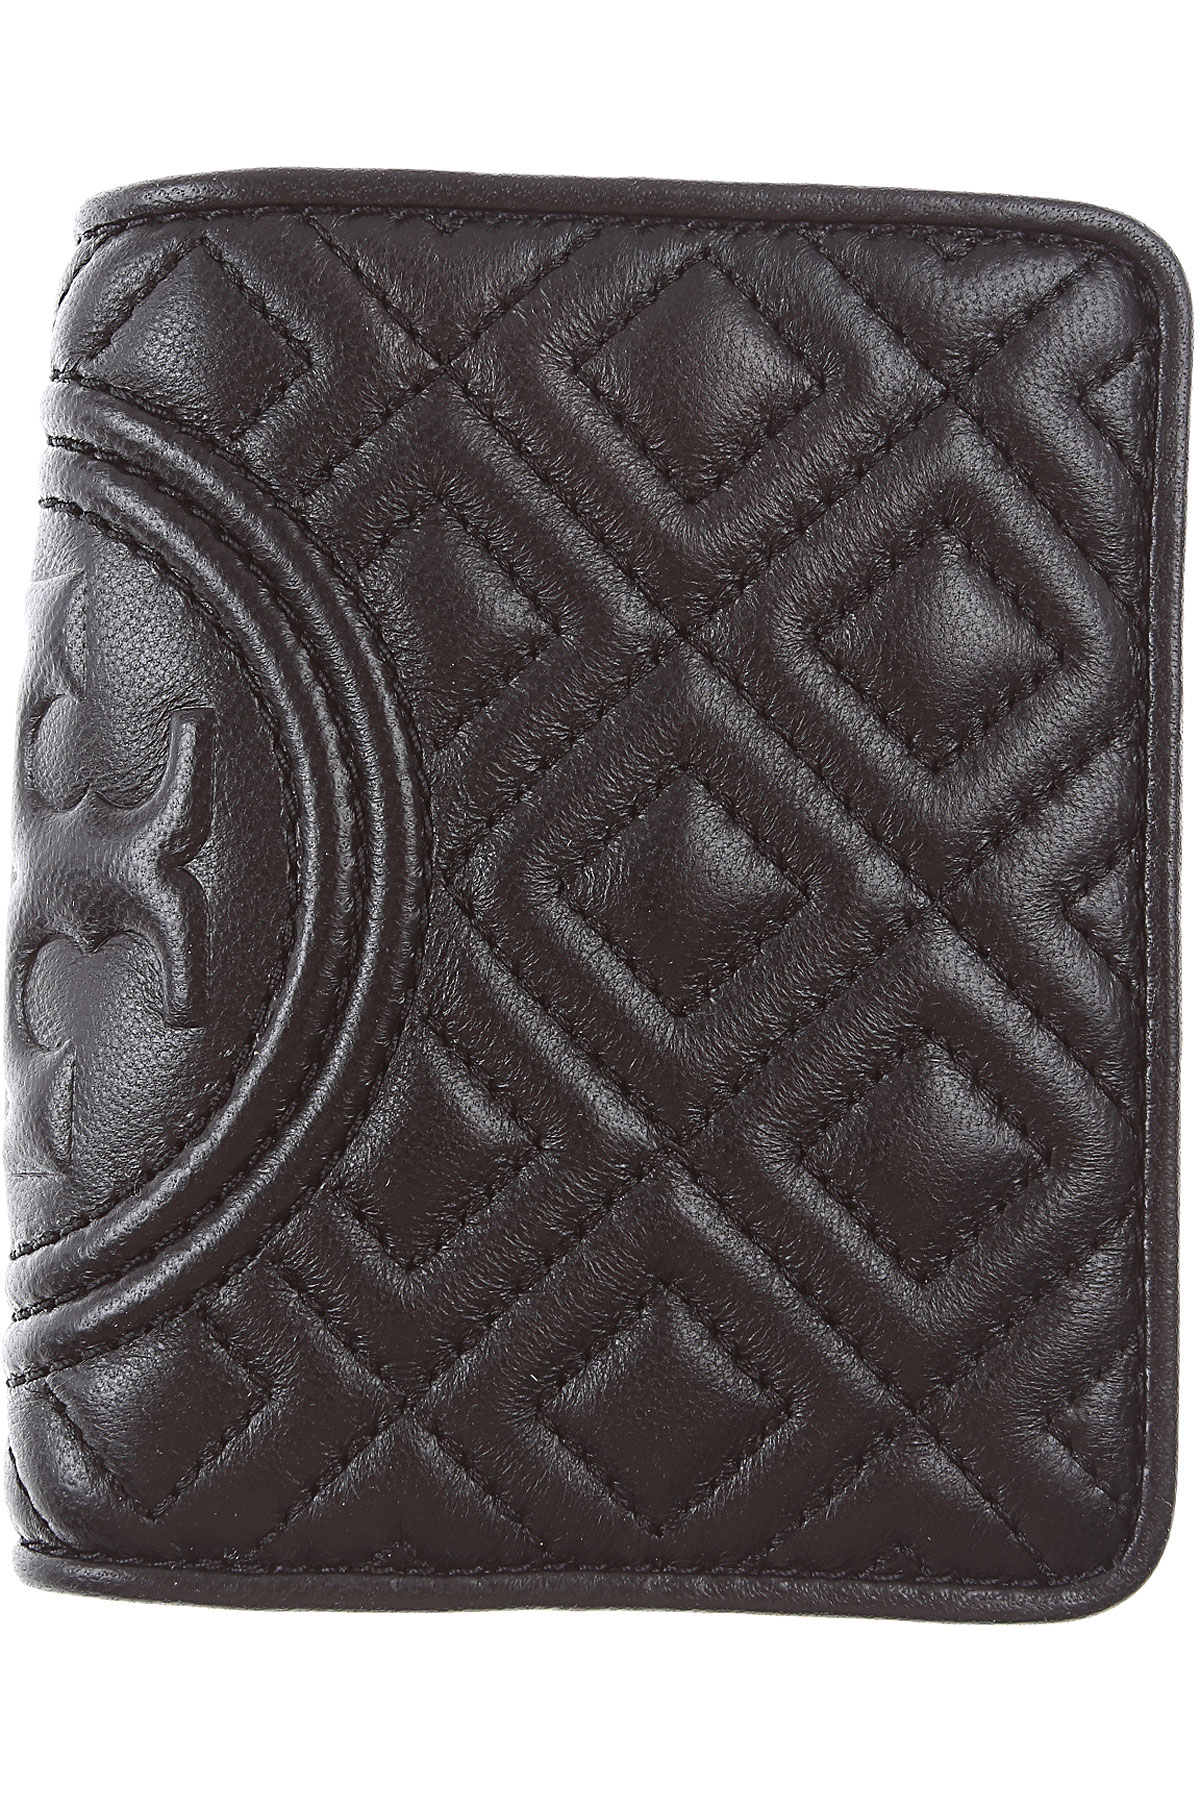 Womens Wallets Tory Burch, Style code: 56804-001-